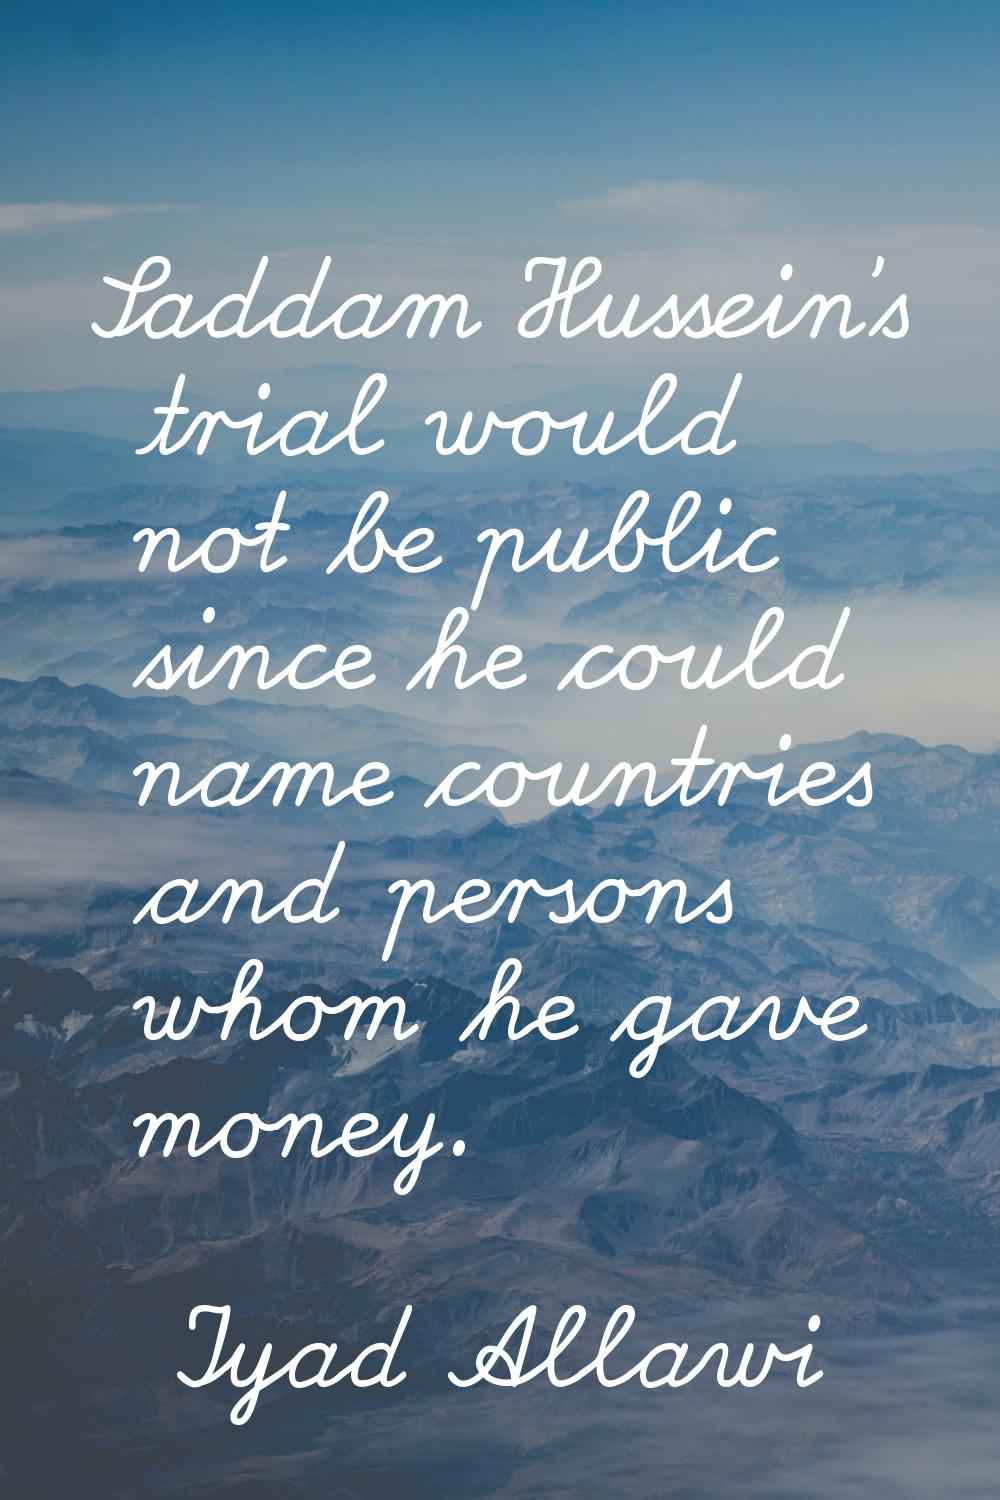 Saddam Hussein's trial would not be public since he could name countries and persons whom he gave m